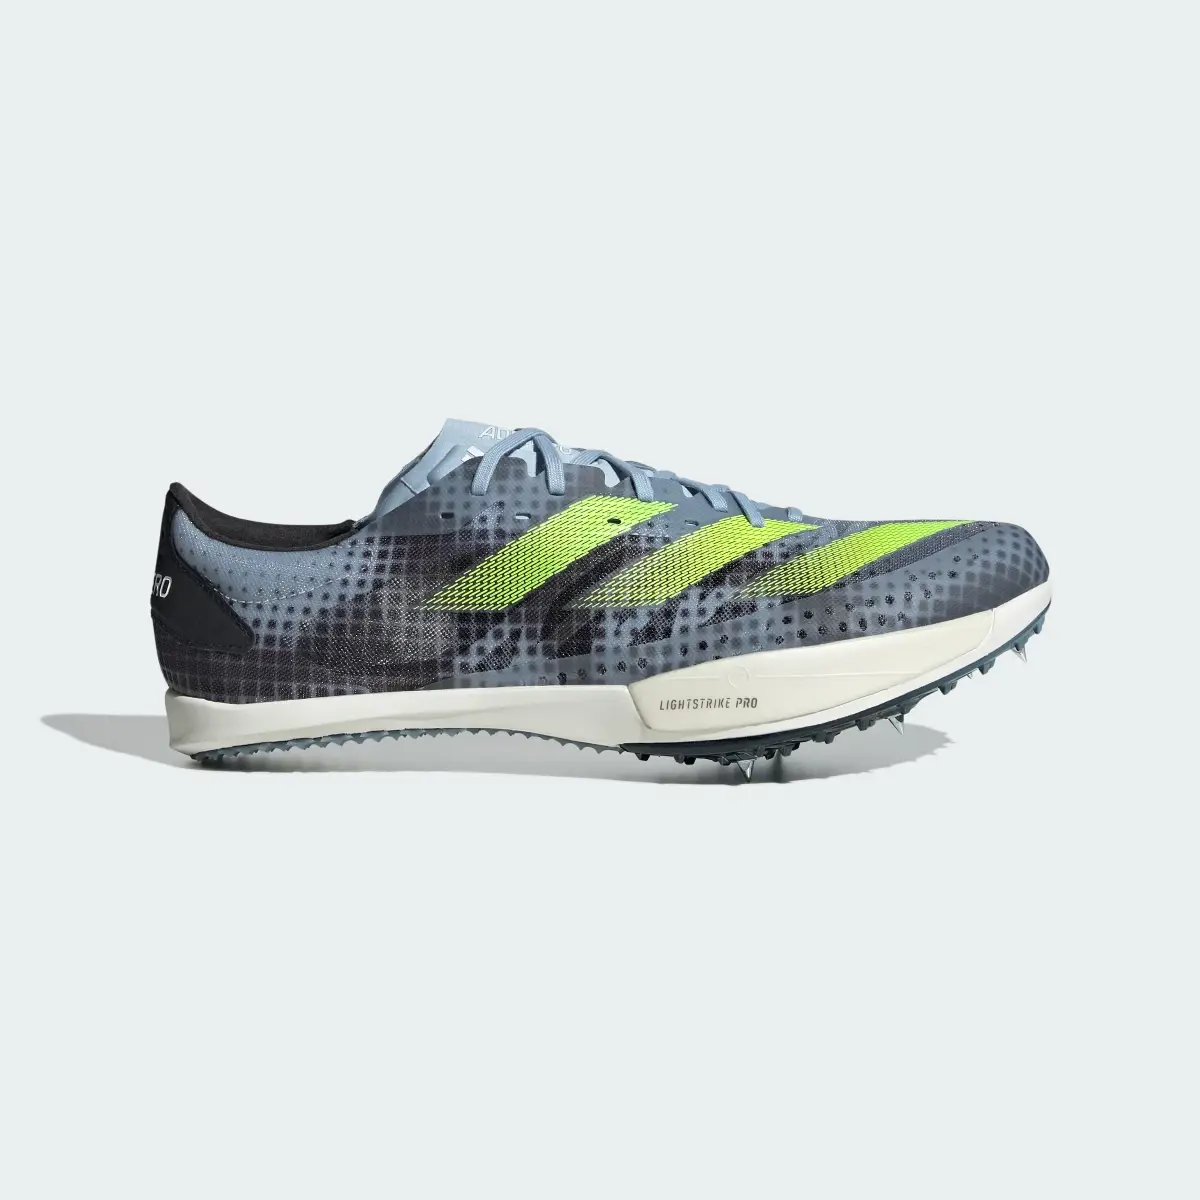 Adidas Adizero Ambition Track and Field Lightstrike Shoes. 2